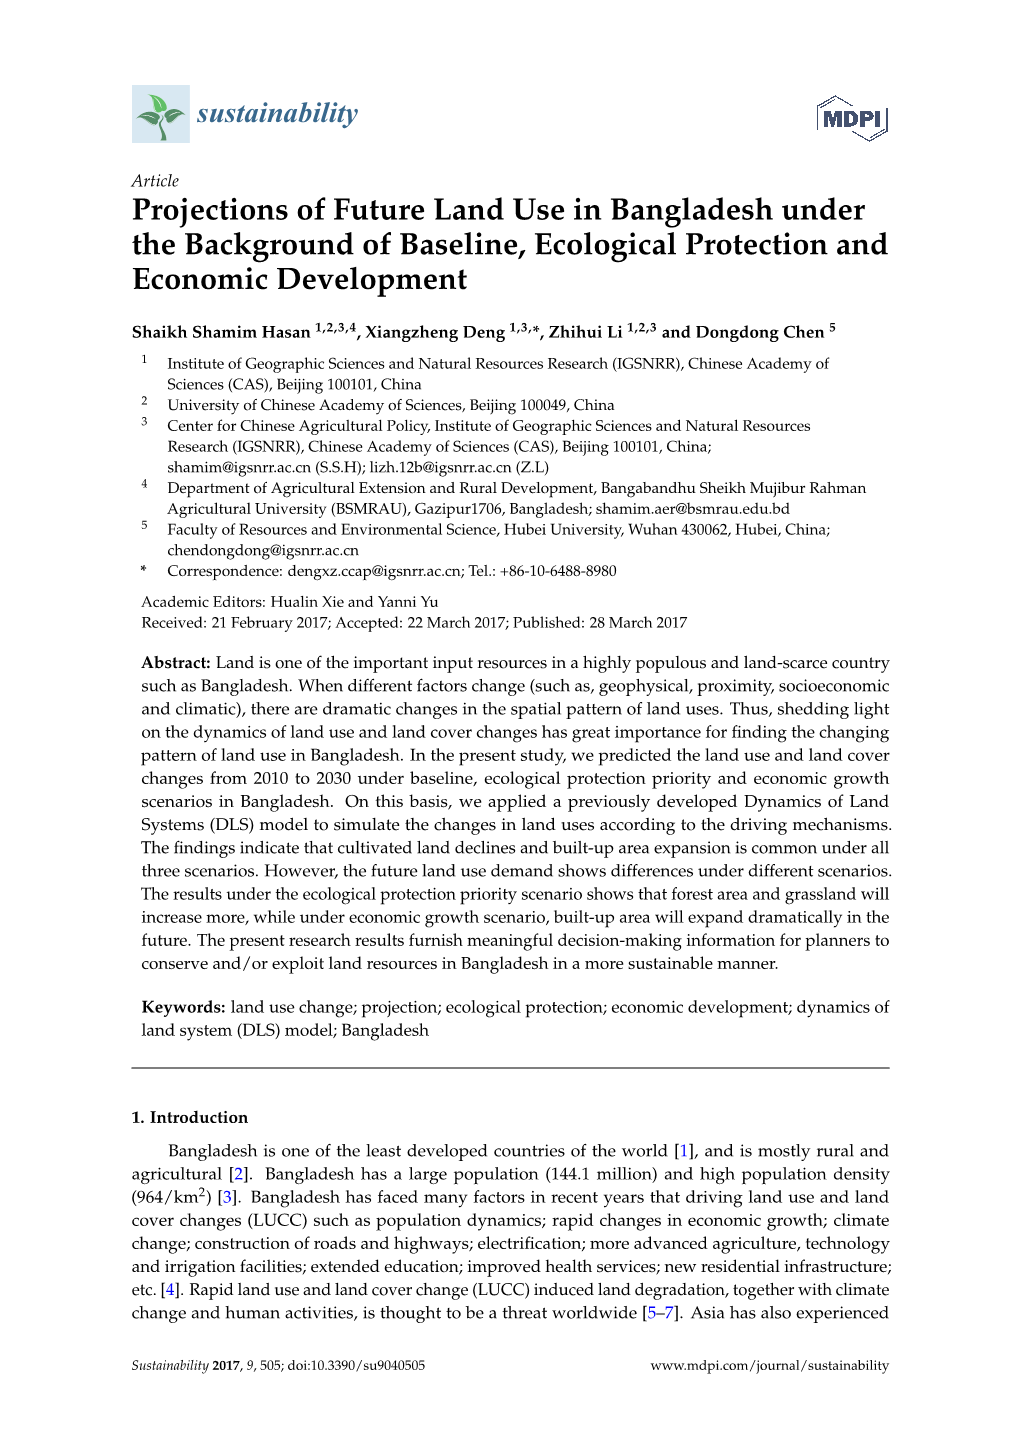 Projections of Future Land Use in Bangladesh Under the Background of Baseline, Ecological Protection and Economic Development